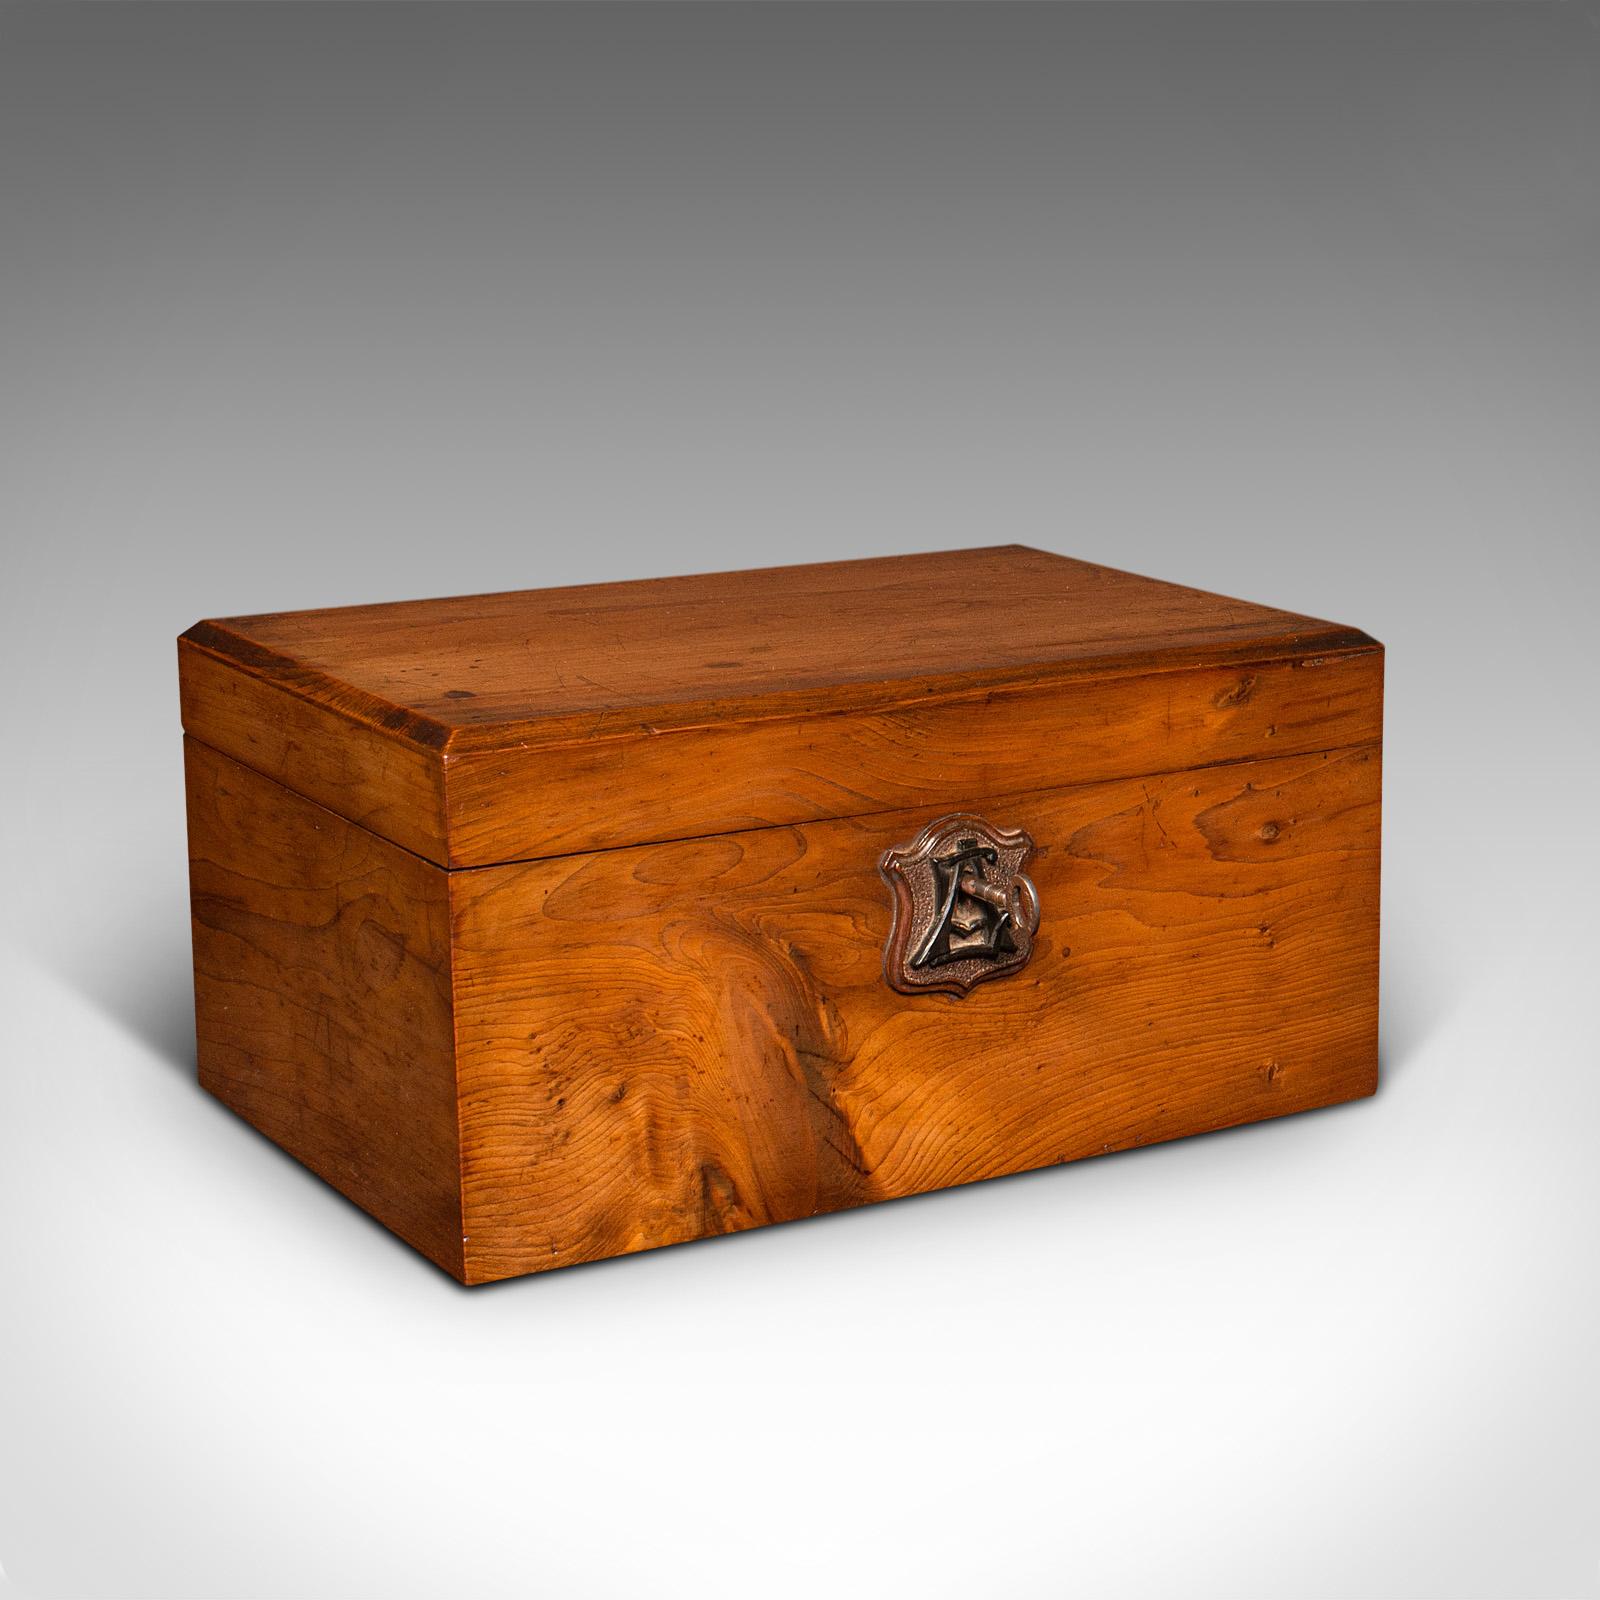 This is an antique keepsake box. A Scottish, sycamore work or jewellery case, dating to the Victorian period, circa 1880.

Gorgeous figuring to these delightful Scottish case
Displays a desirable aged patina and in good order
Select sycamore